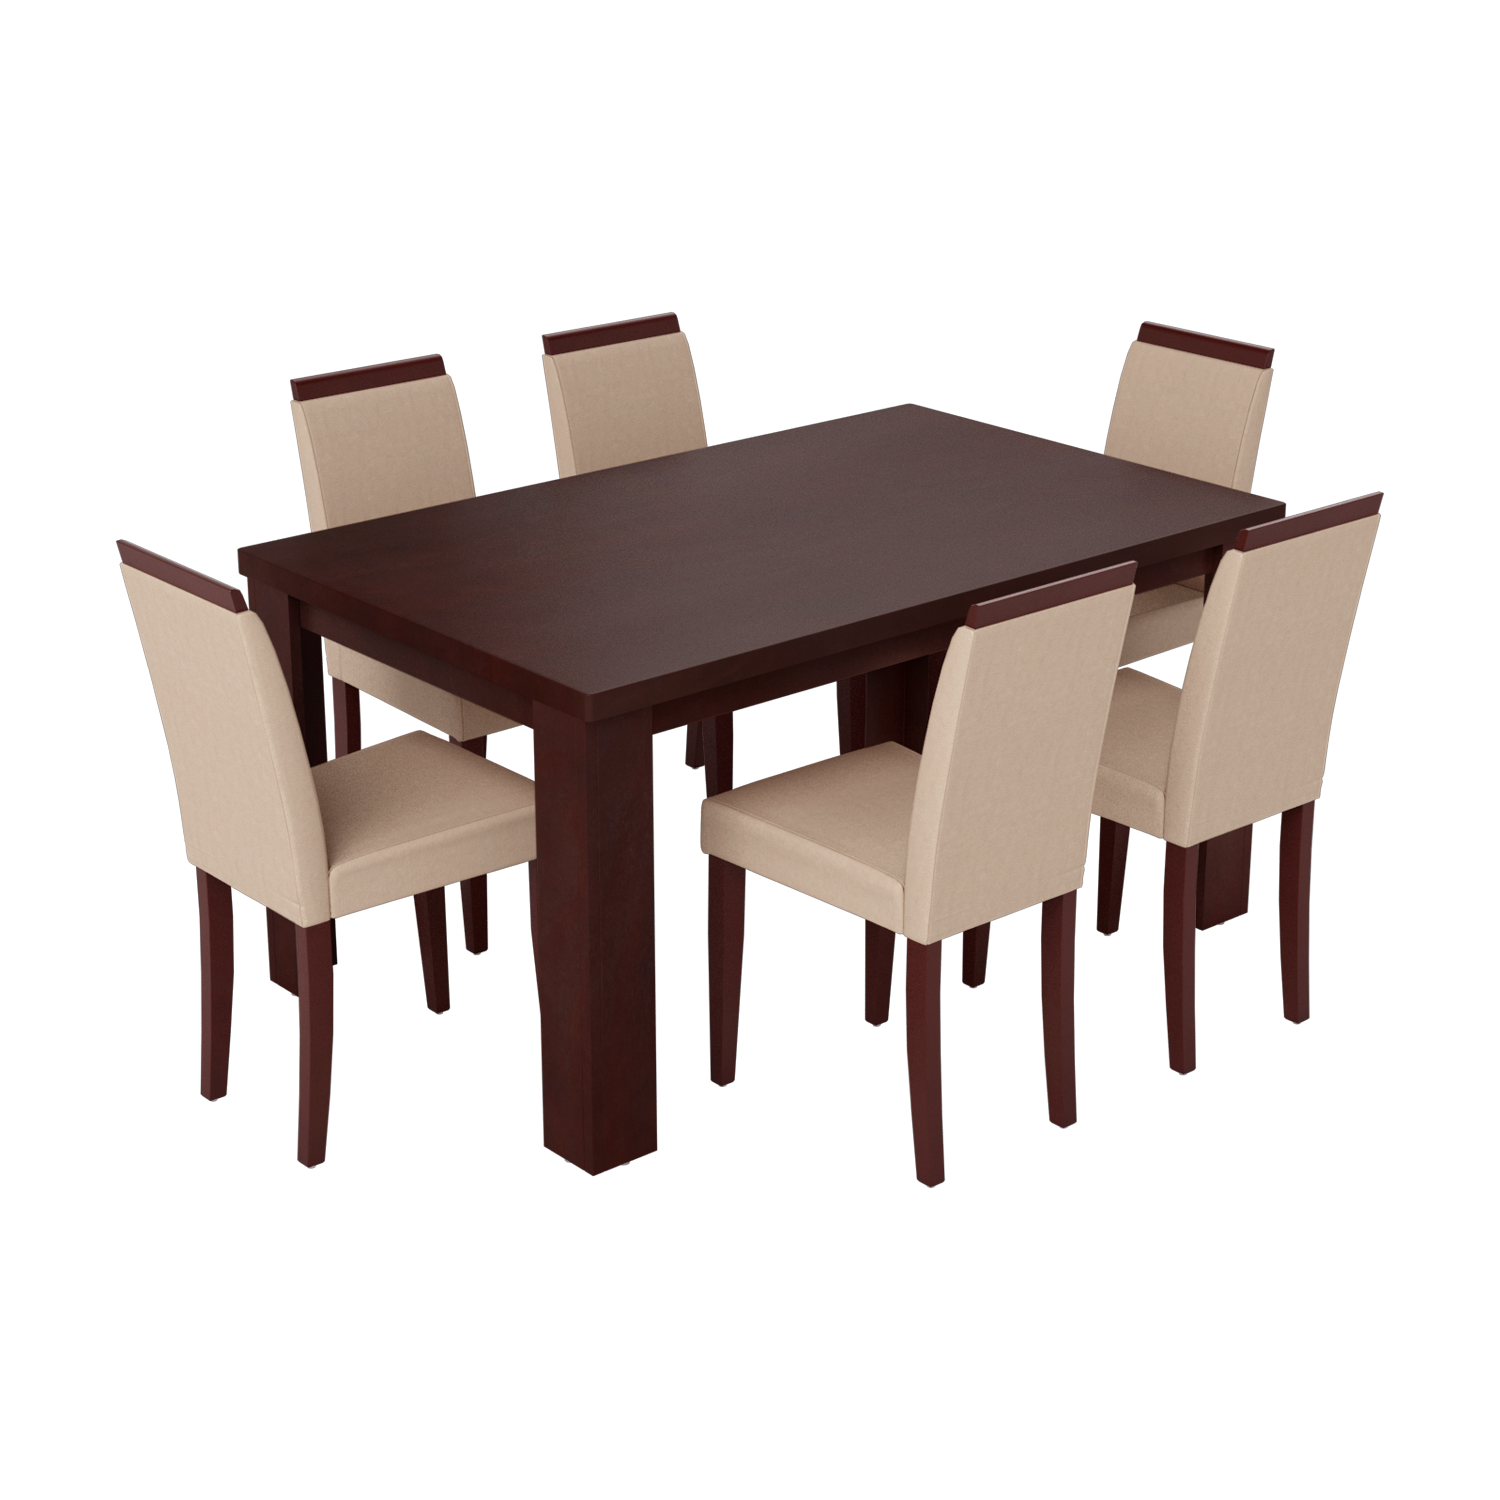 Jack 6 Seater Dining Table Set In, How Long Is A 6 Seater Table